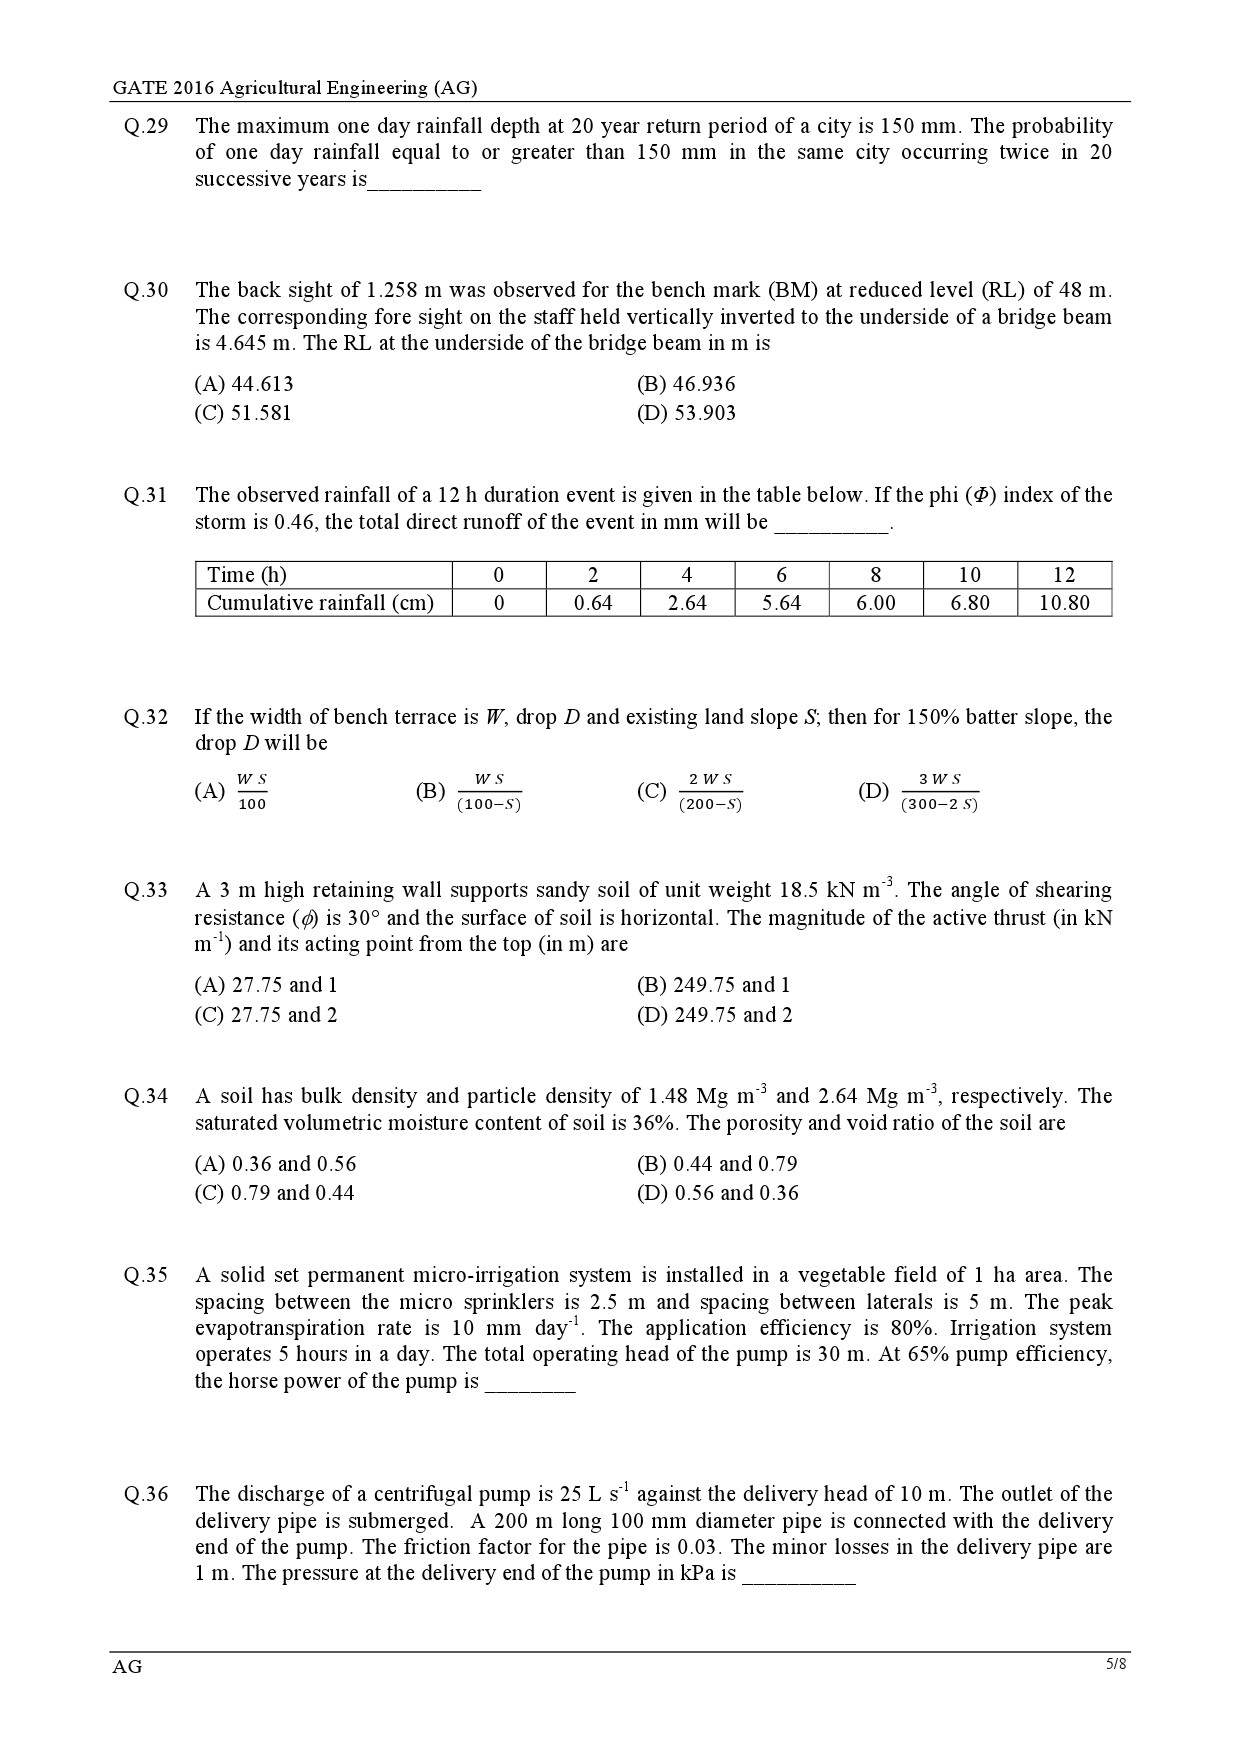 GATE Exam Question Paper 2016 Agricultural Engineering 5